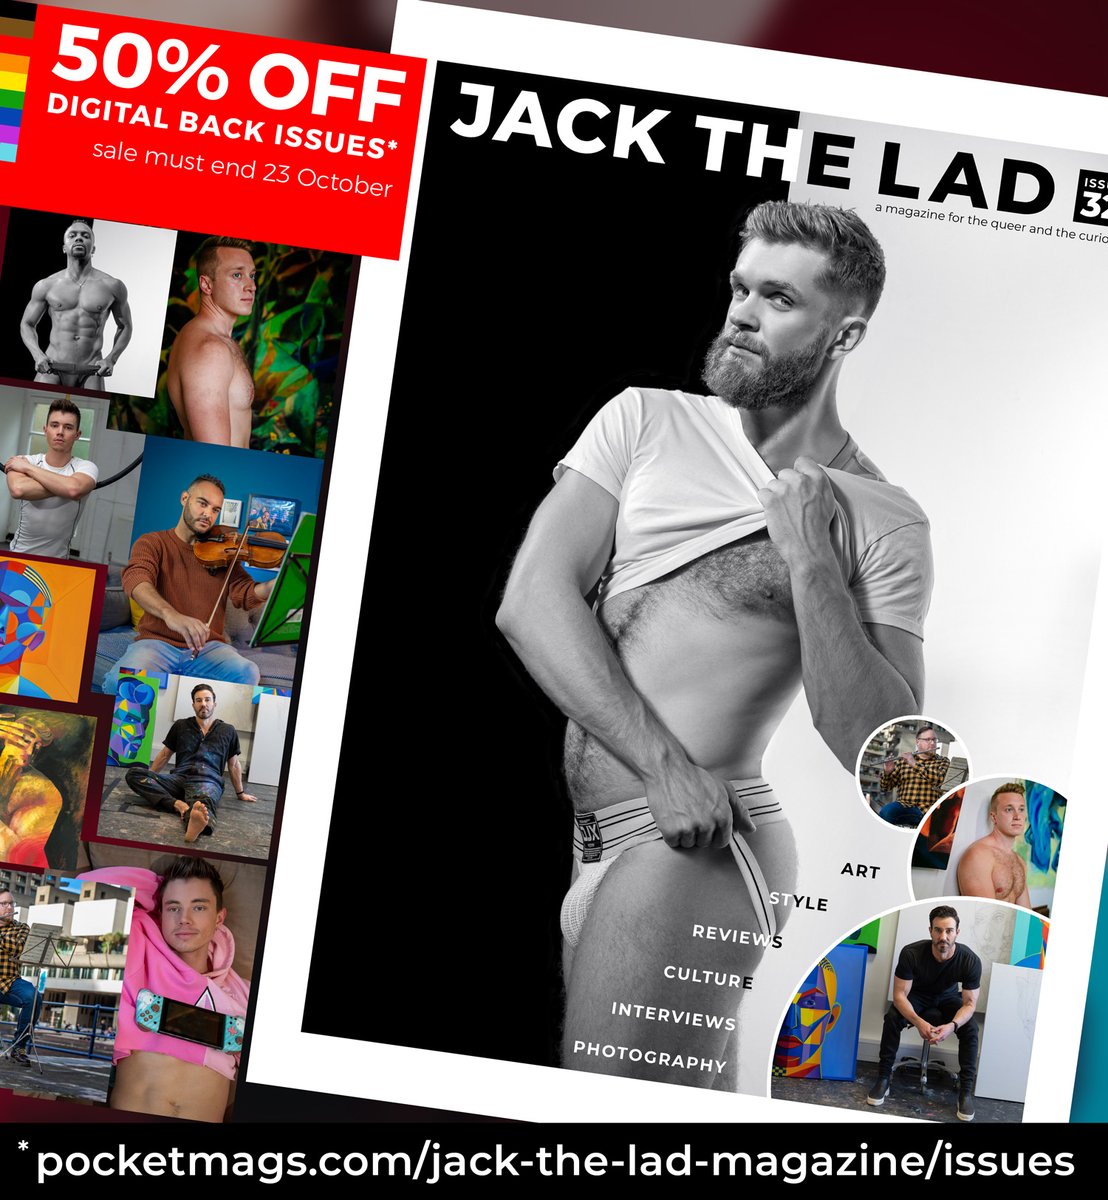 FOMO FLASH SALE! To coincide with our '100 interviews / 100 portraits' posts, this weekend you can get your hands on this, or any digital back issue of Jack The Lad for half the original price at pocketmags.com/jack-the-lad-m… Sale must end midnight (BST) Monday 23rd October